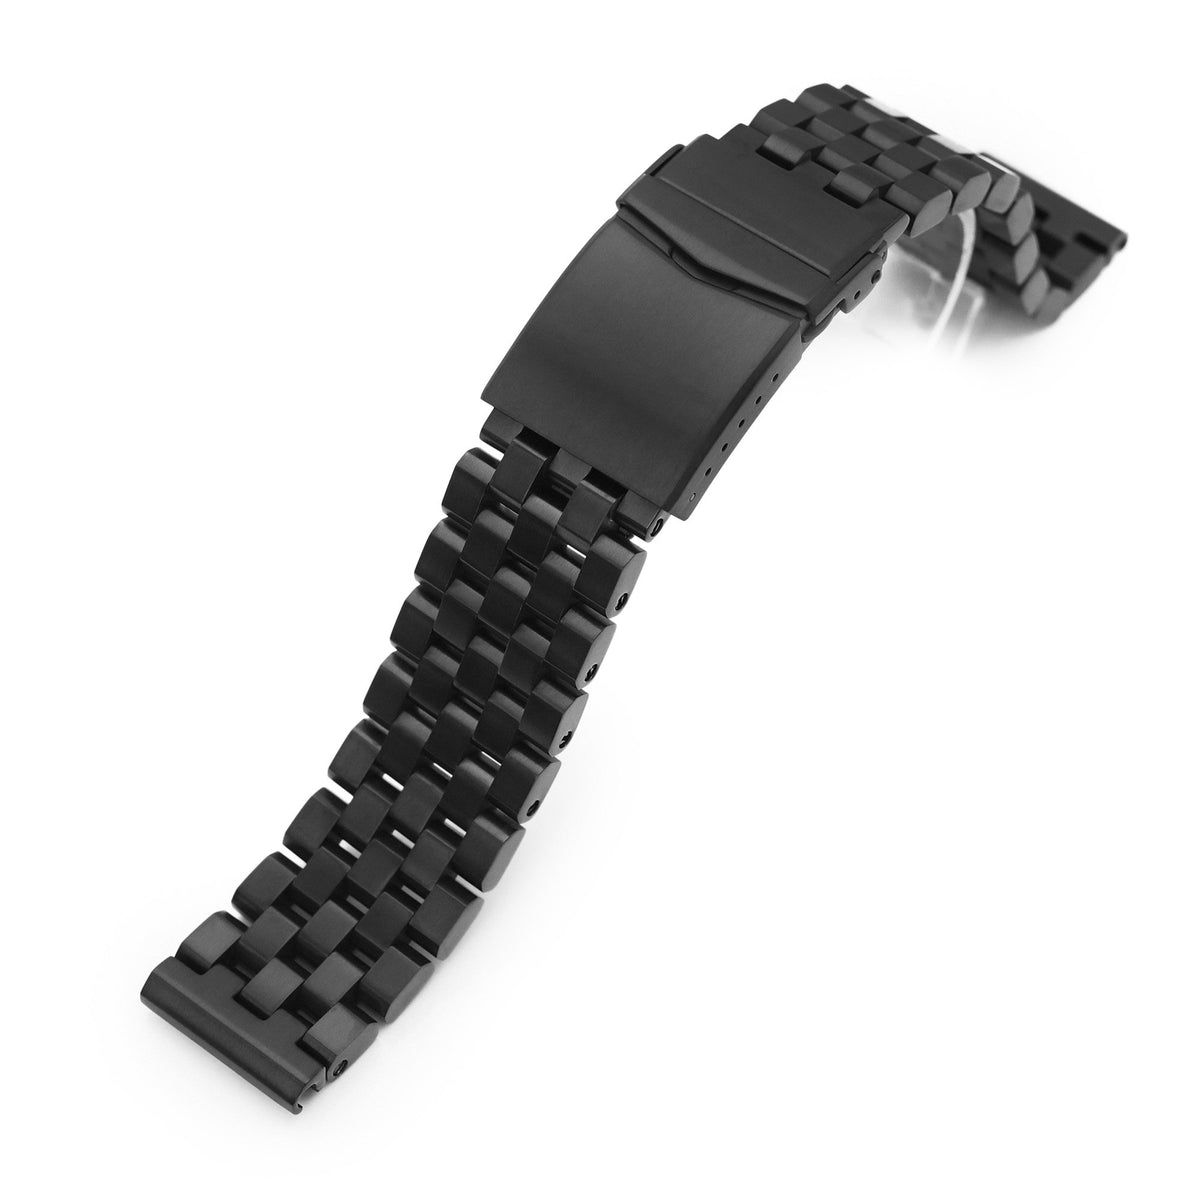 Super Engineer II Watch Band Straight End, 316L Stainless Steel Diamond-like Carbon (DLC coating) V-Clasp Strapcode Watch Bands